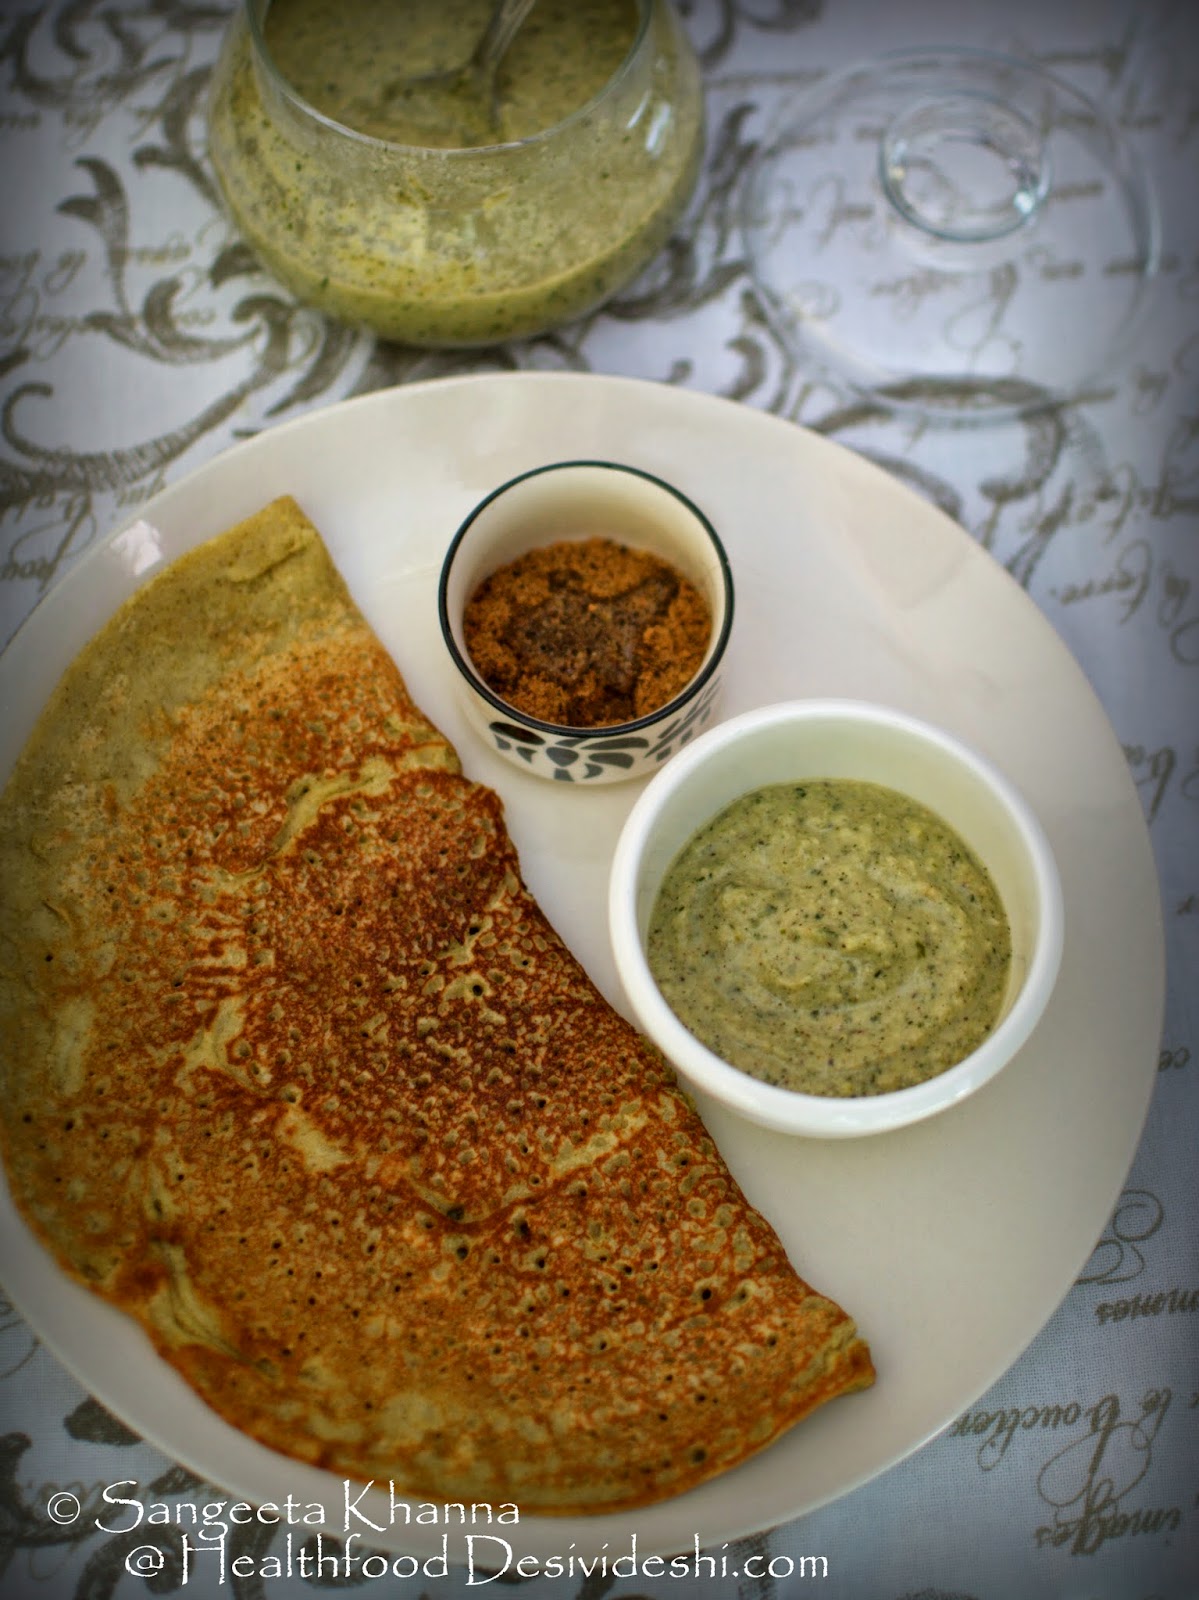 making breakfast dosa interesting with vegetable based chutneys | making chutneys with ivy gourd and long beans